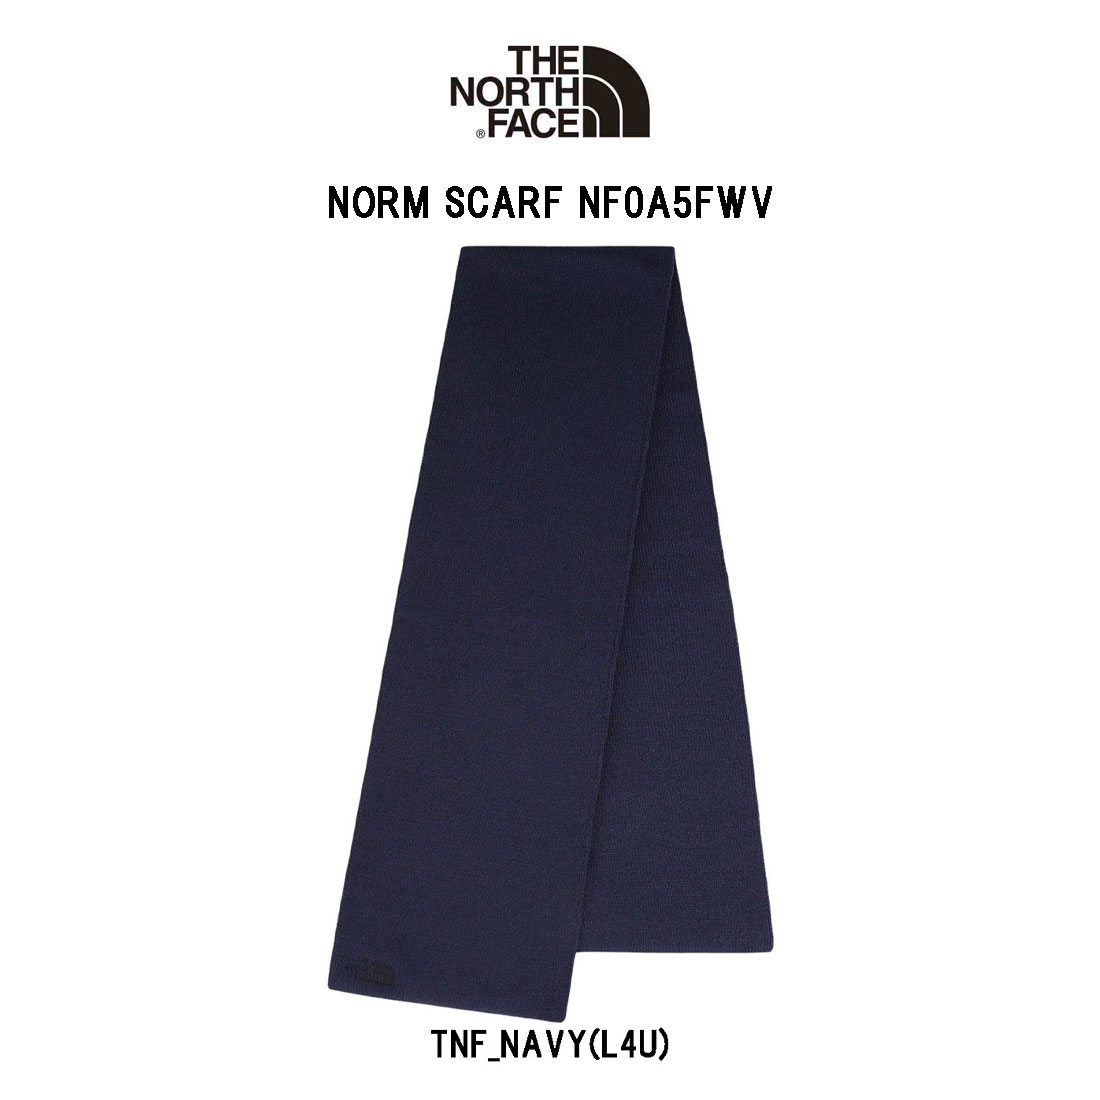 THE NORTH FACE(ザノースフェイス)マフラー 小物 アクセサリー NORM SCARF NF0A5FWV